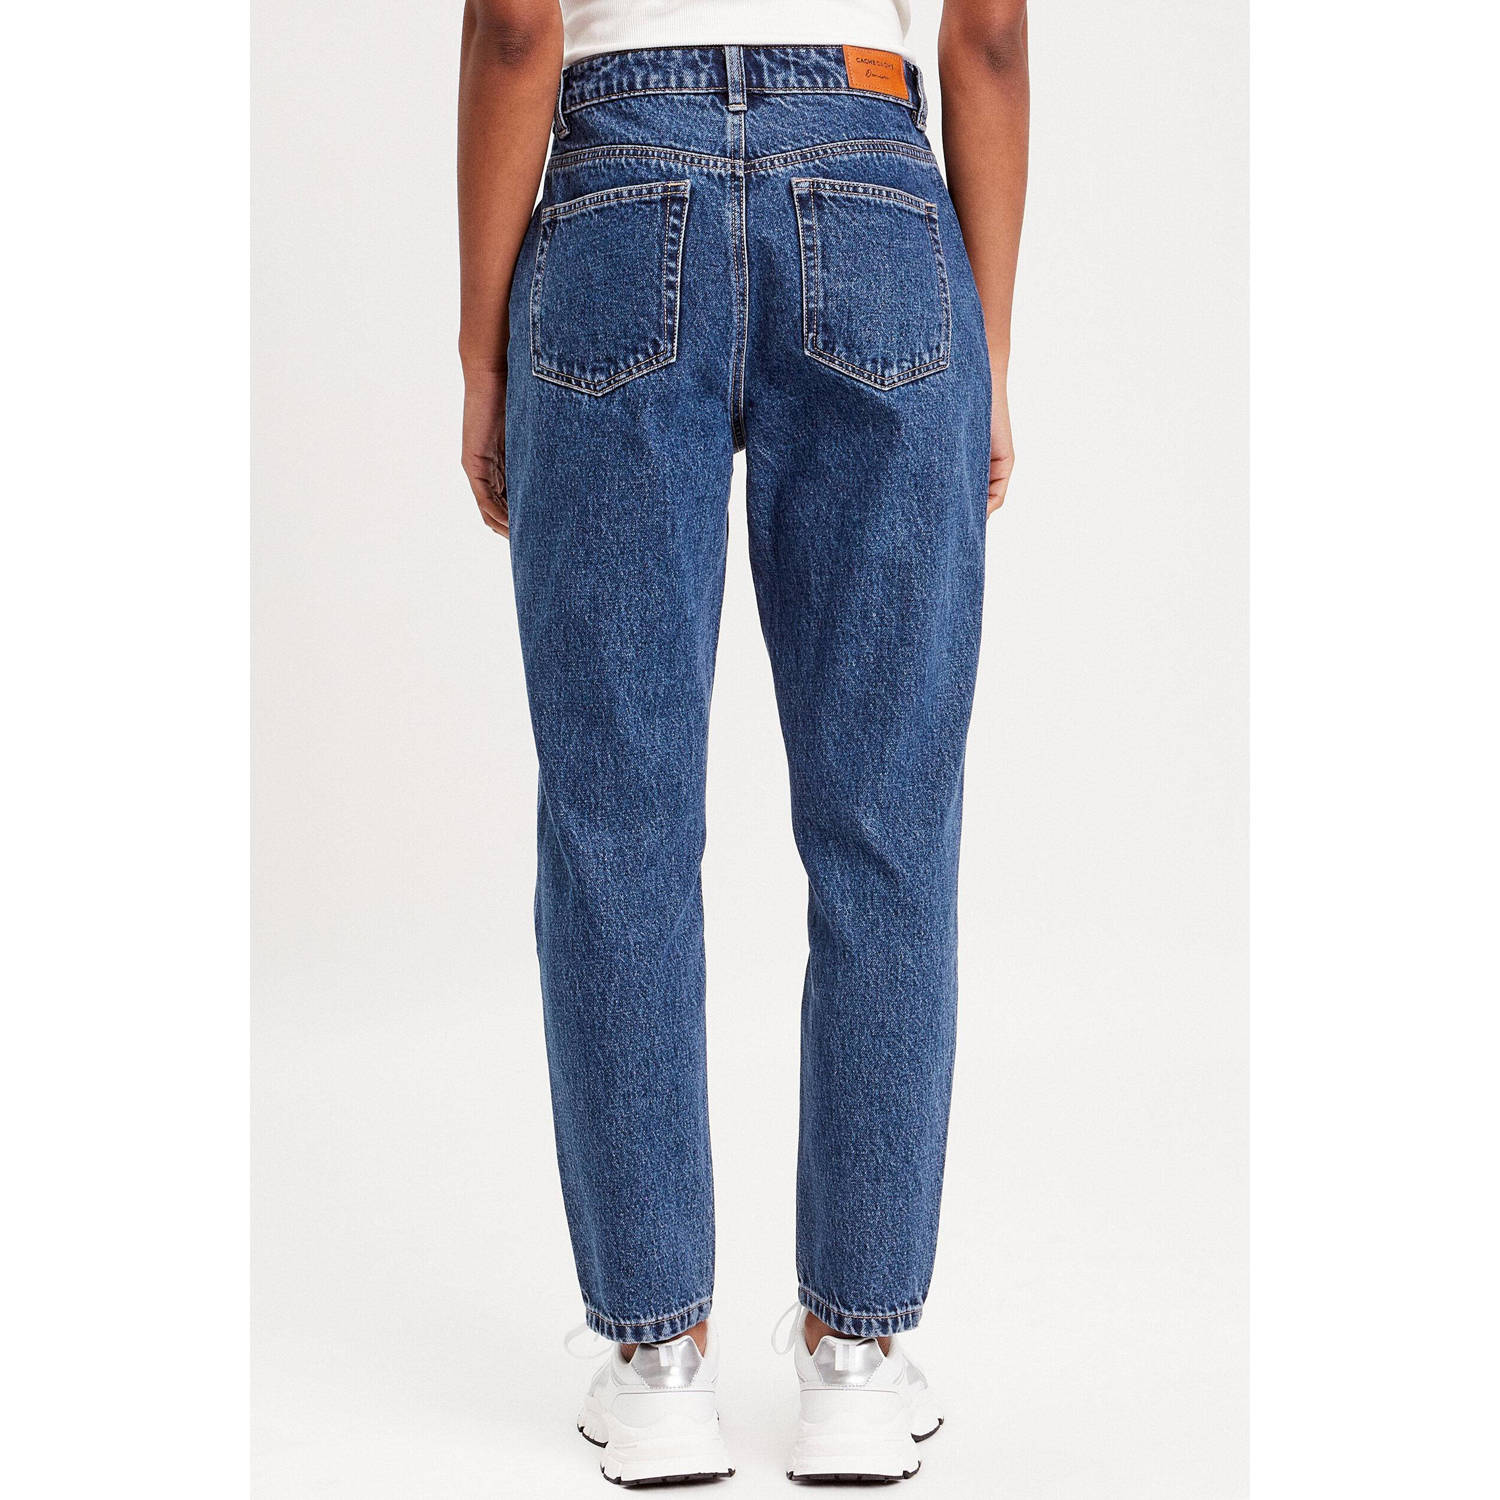 Cache cropped high waist mom jeans stonewashed blue